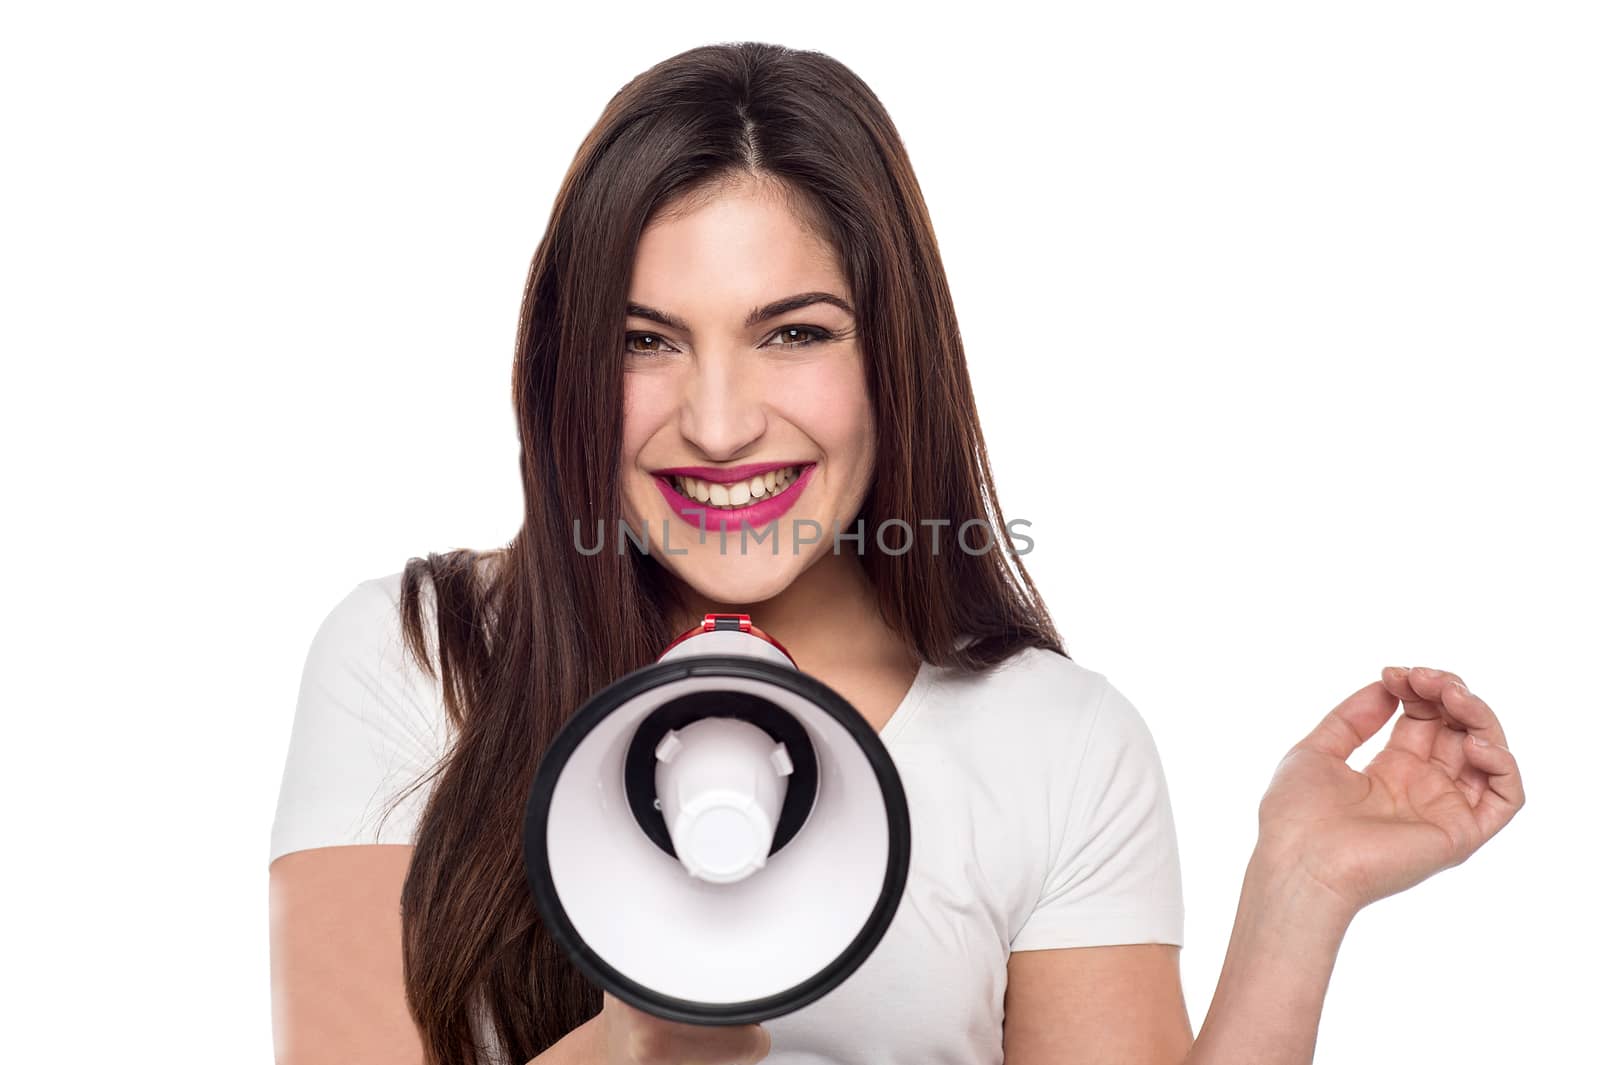 Cheerful young woman posing with loudhailer over white